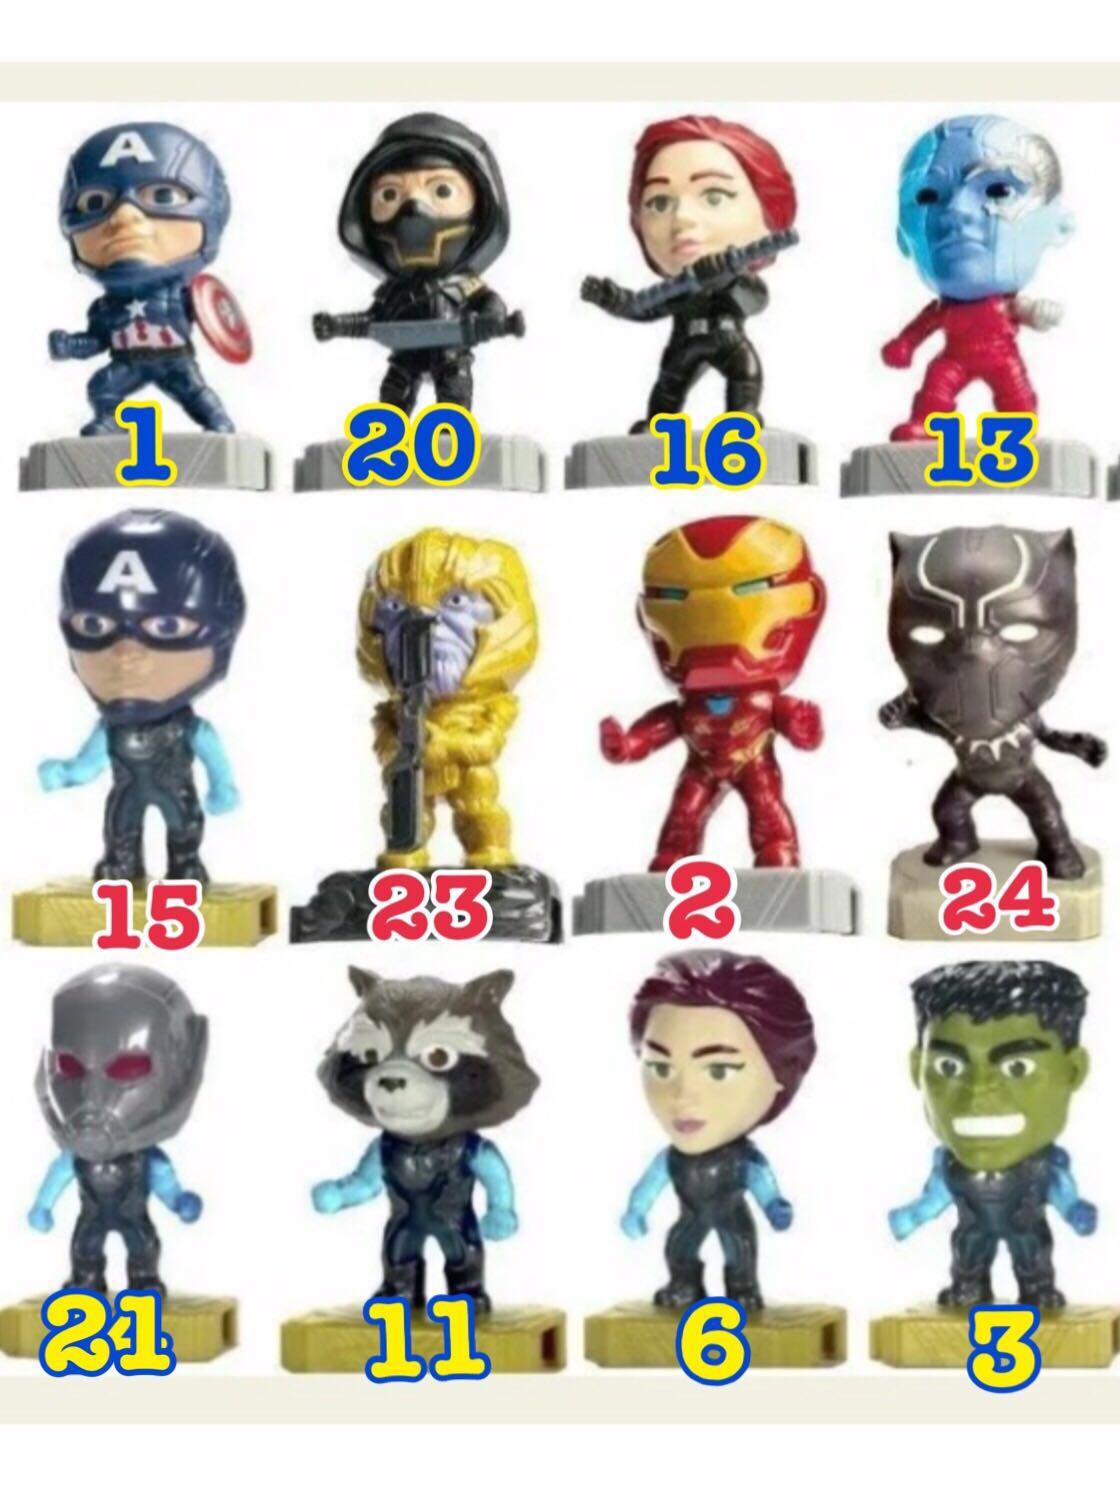 McDONALD'S 2020 MARVEL AVENGERS HEROES HAPPY MEAL TOYS PICK YOUR FAVORITES! 